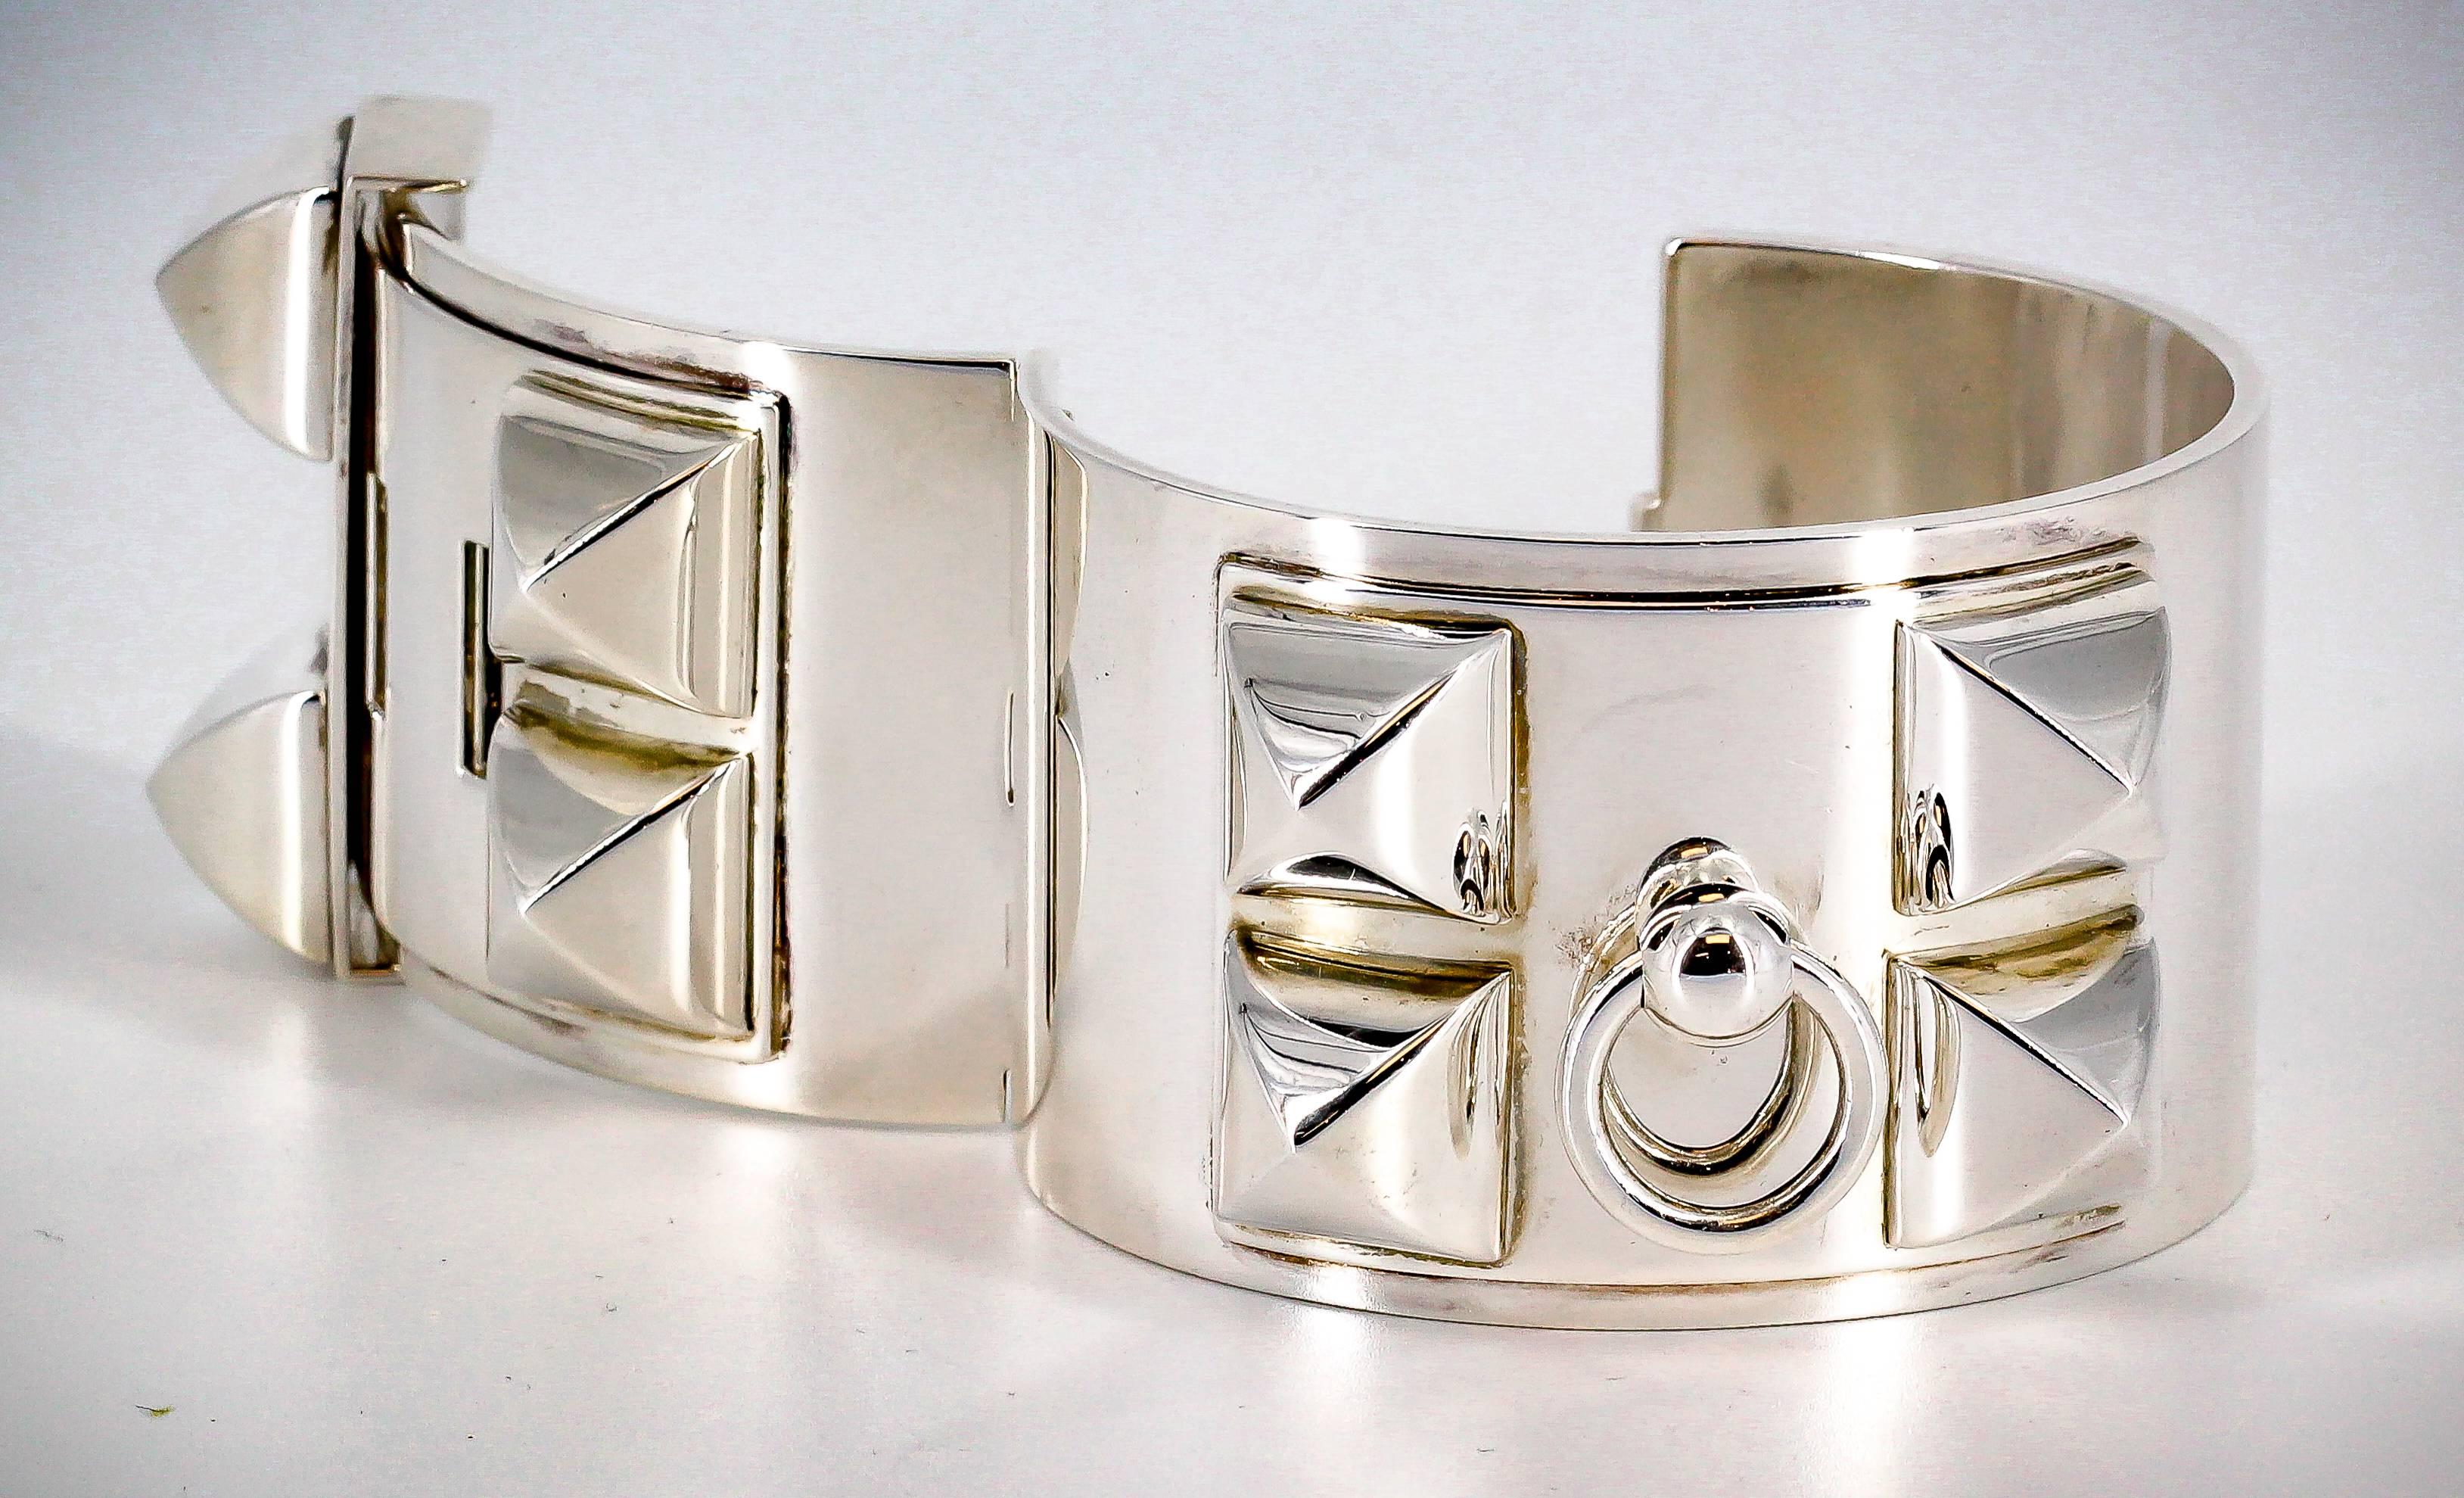 Bold sterling silver studded cuff bracelet from the Collier de Chien collections by Hermes. It features a smooth finish with large studs and easy closure. This is the large version they offer.

Hallmarks: Hermes, AG925, Made in Germany, A * G, LG.